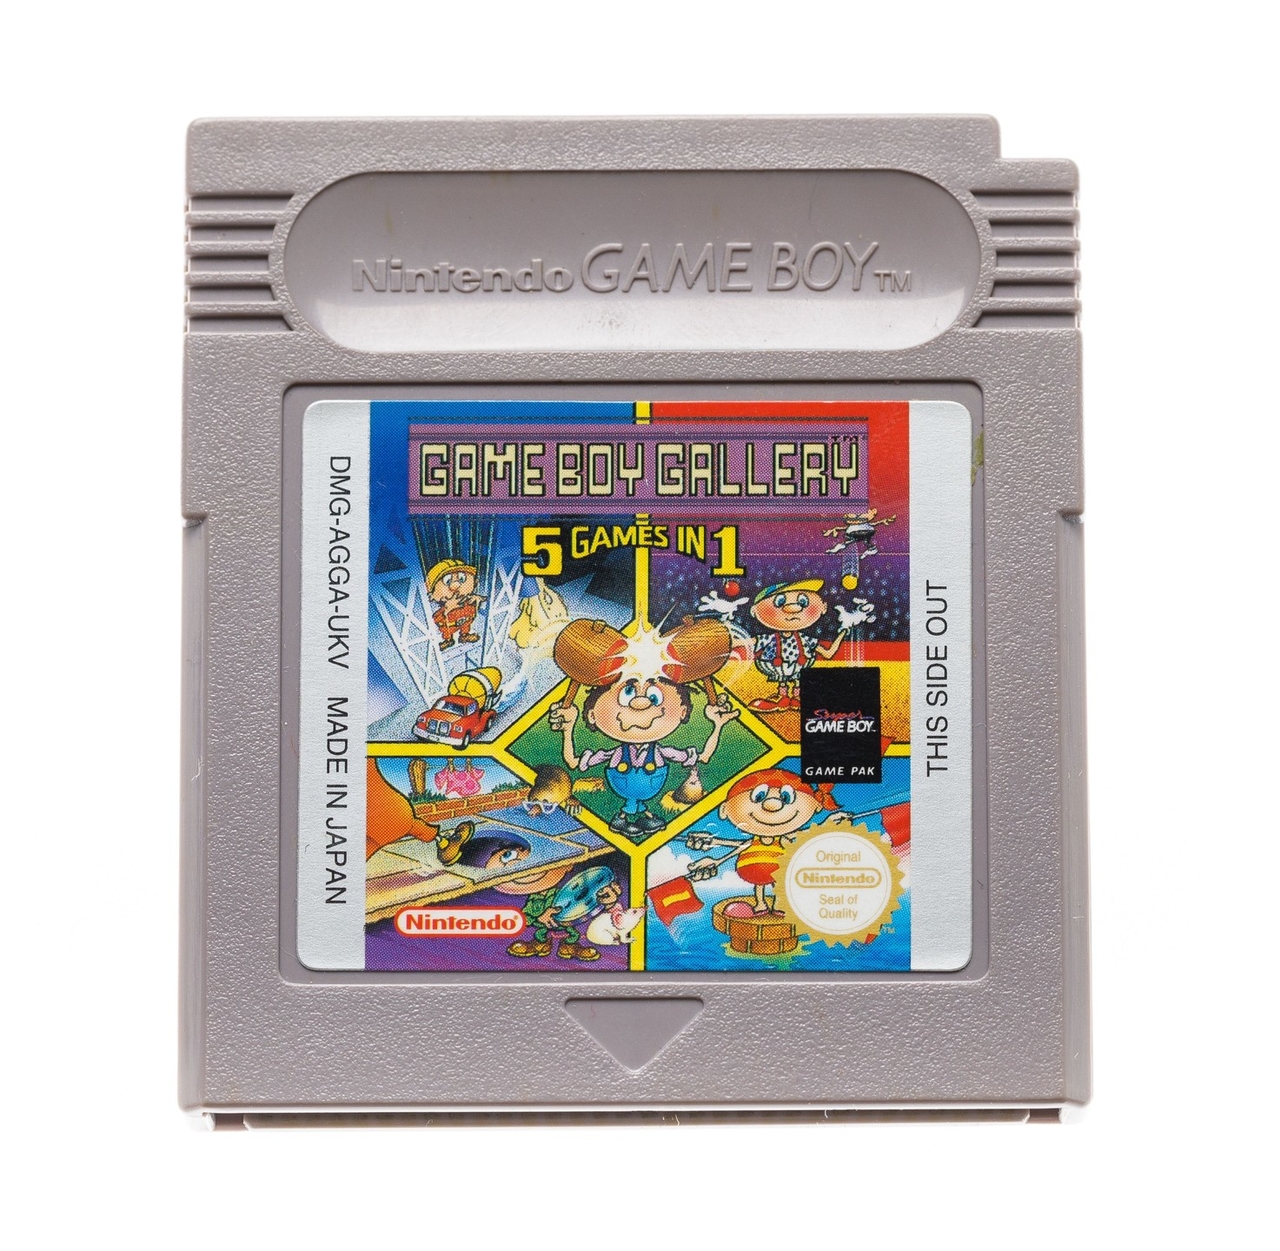 Game Boy Gallery: 5 Games in 1 - Gameboy Classic Games